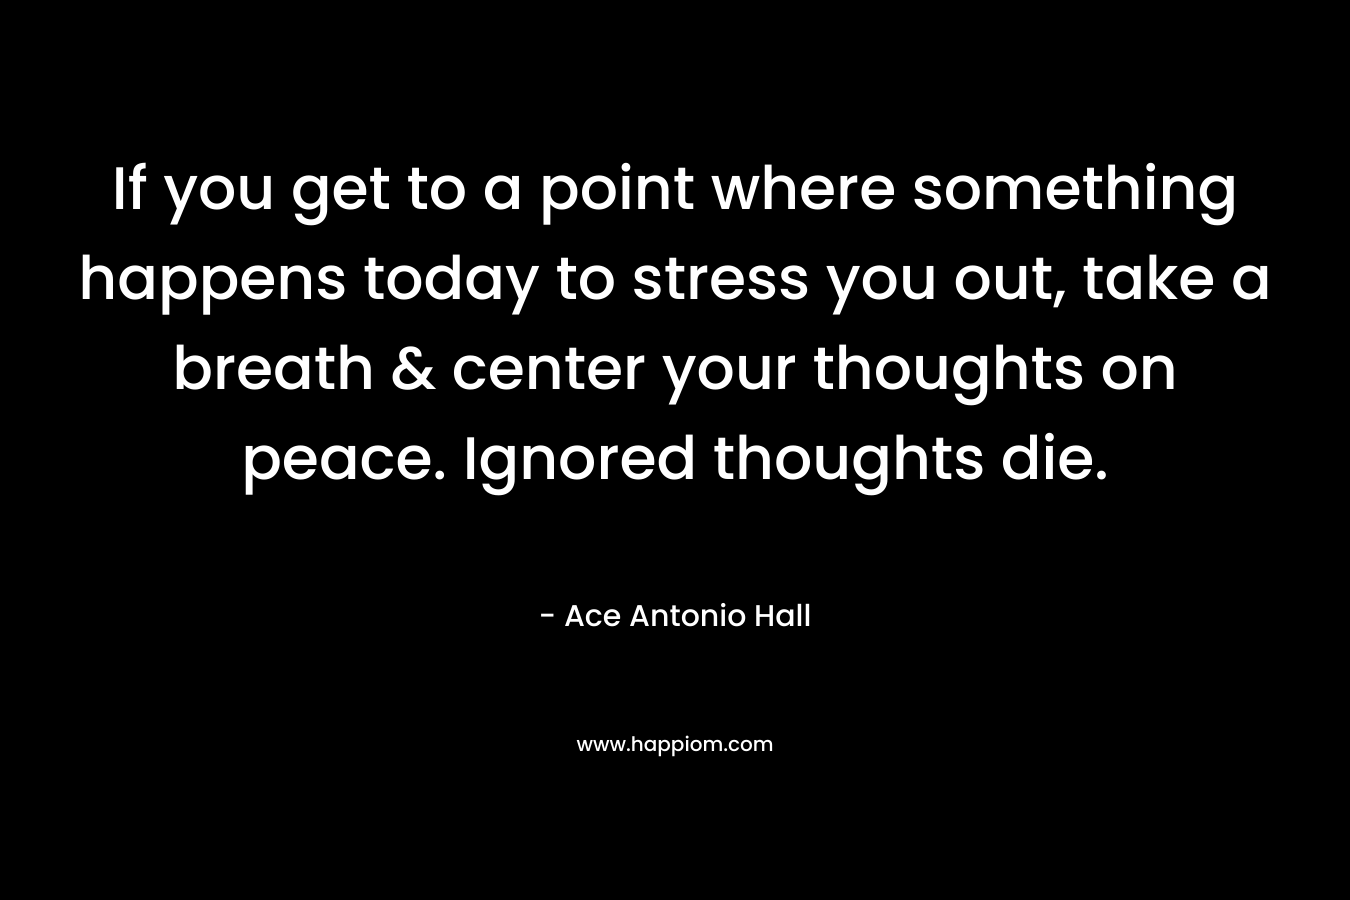 If you get to a point where something happens today to stress you out, take a breath & center your thoughts on peace. Ignored thoughts die. – Ace Antonio Hall